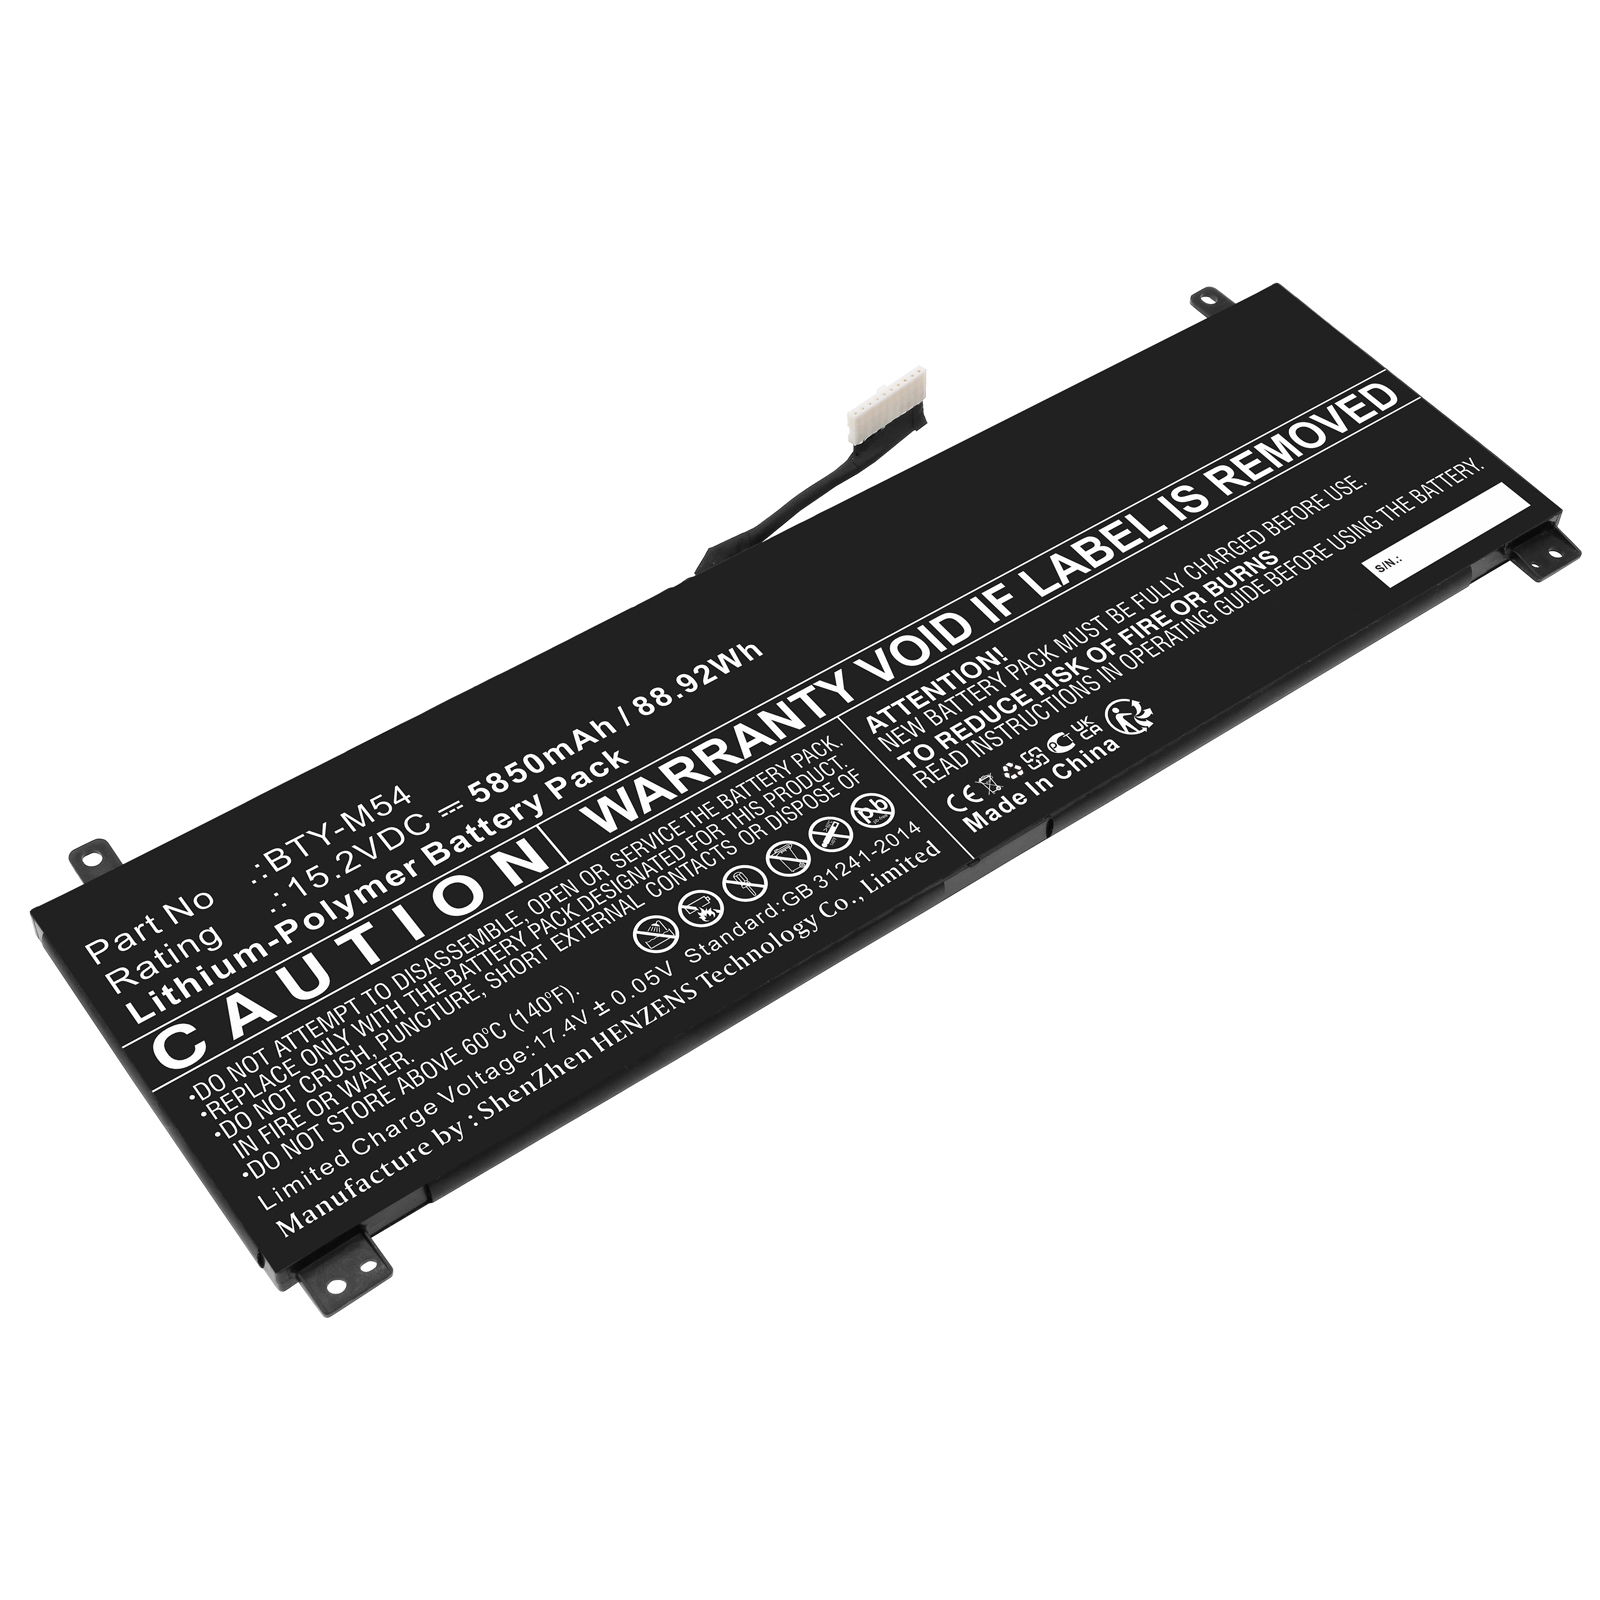 Synergy Digital Laptop Battery, Compatible with MSI BTY-M54 Laptop Battery (Li-ion, 15.2V, 5850mAh)